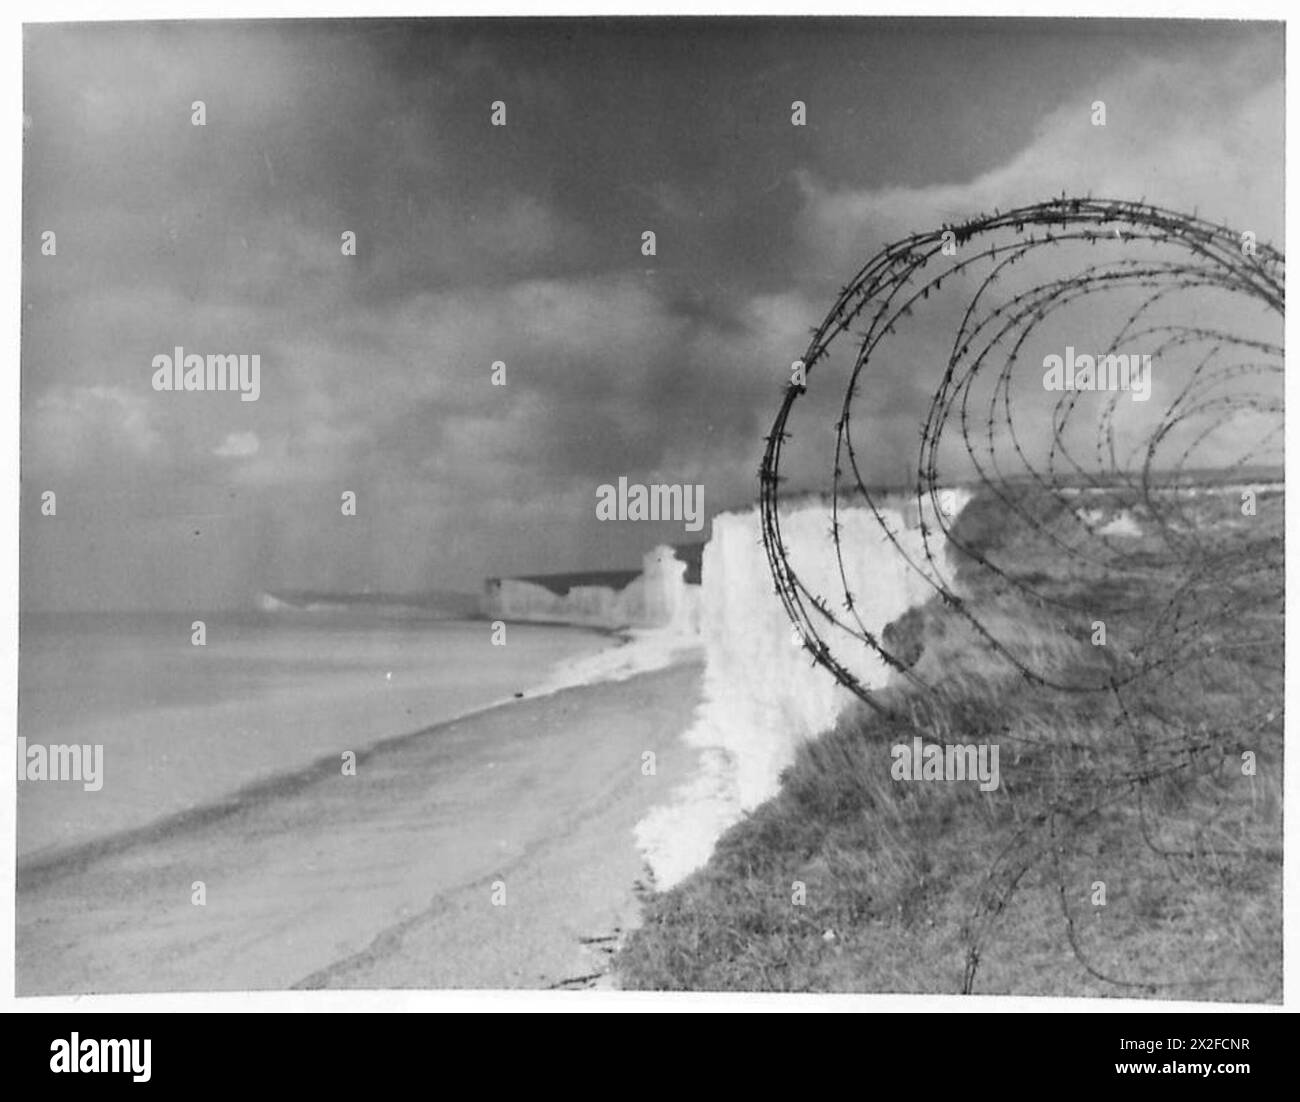 COASTAL DEFENCES - Barbed wire entanglements on the cliffs British Army Stock Photo